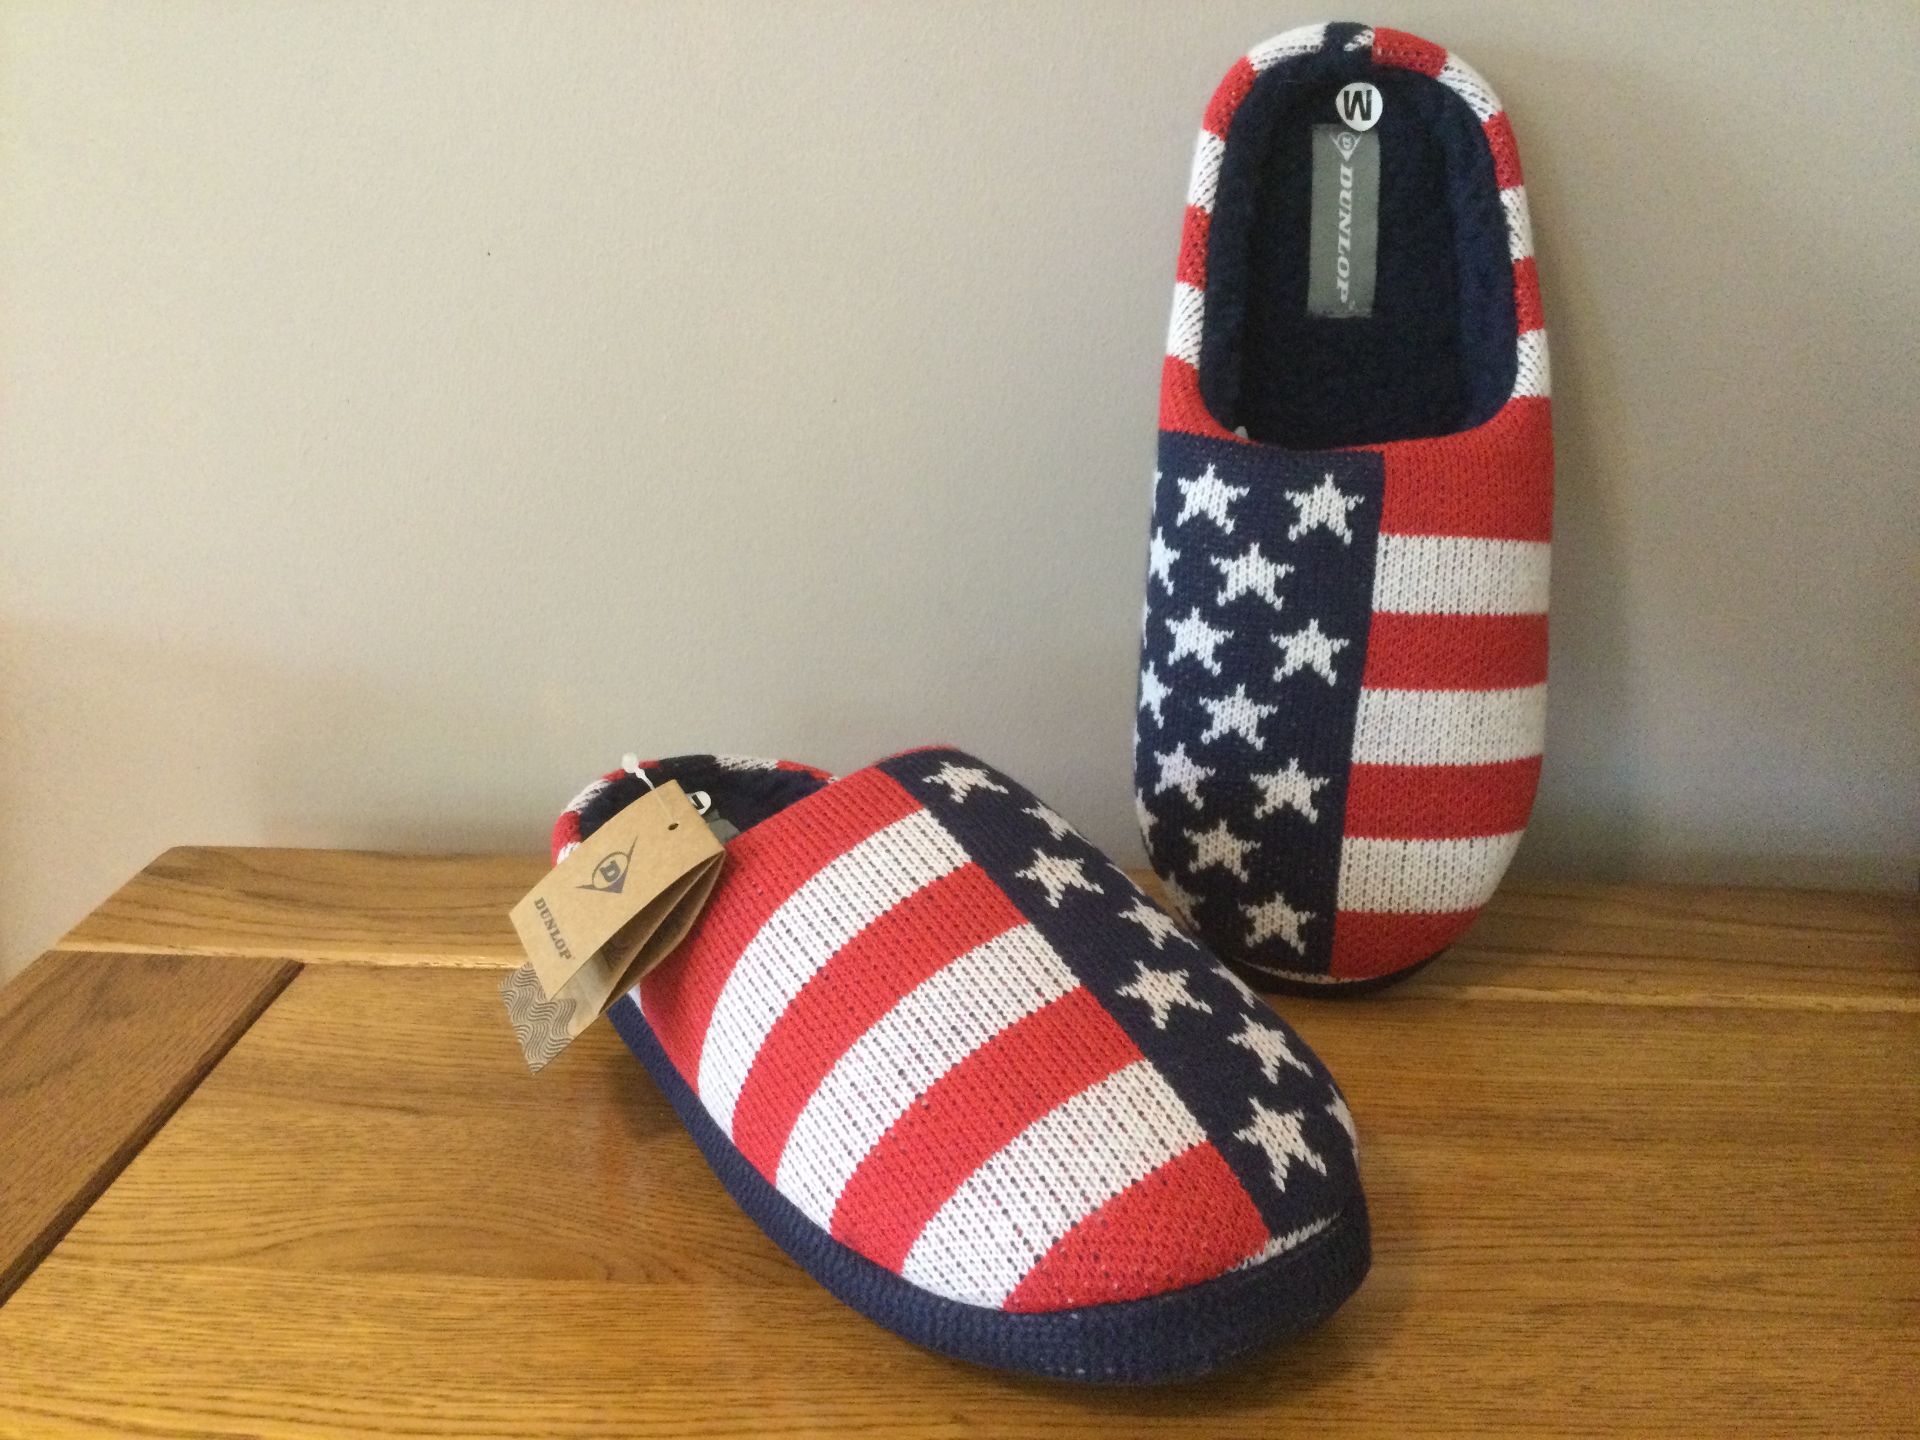 Job Lot 10 x Pairs Men's Dunlop, “USA Stars and Stripes” Memory Foam, Mule Slippers, Size M (8/9) - Image 6 of 7